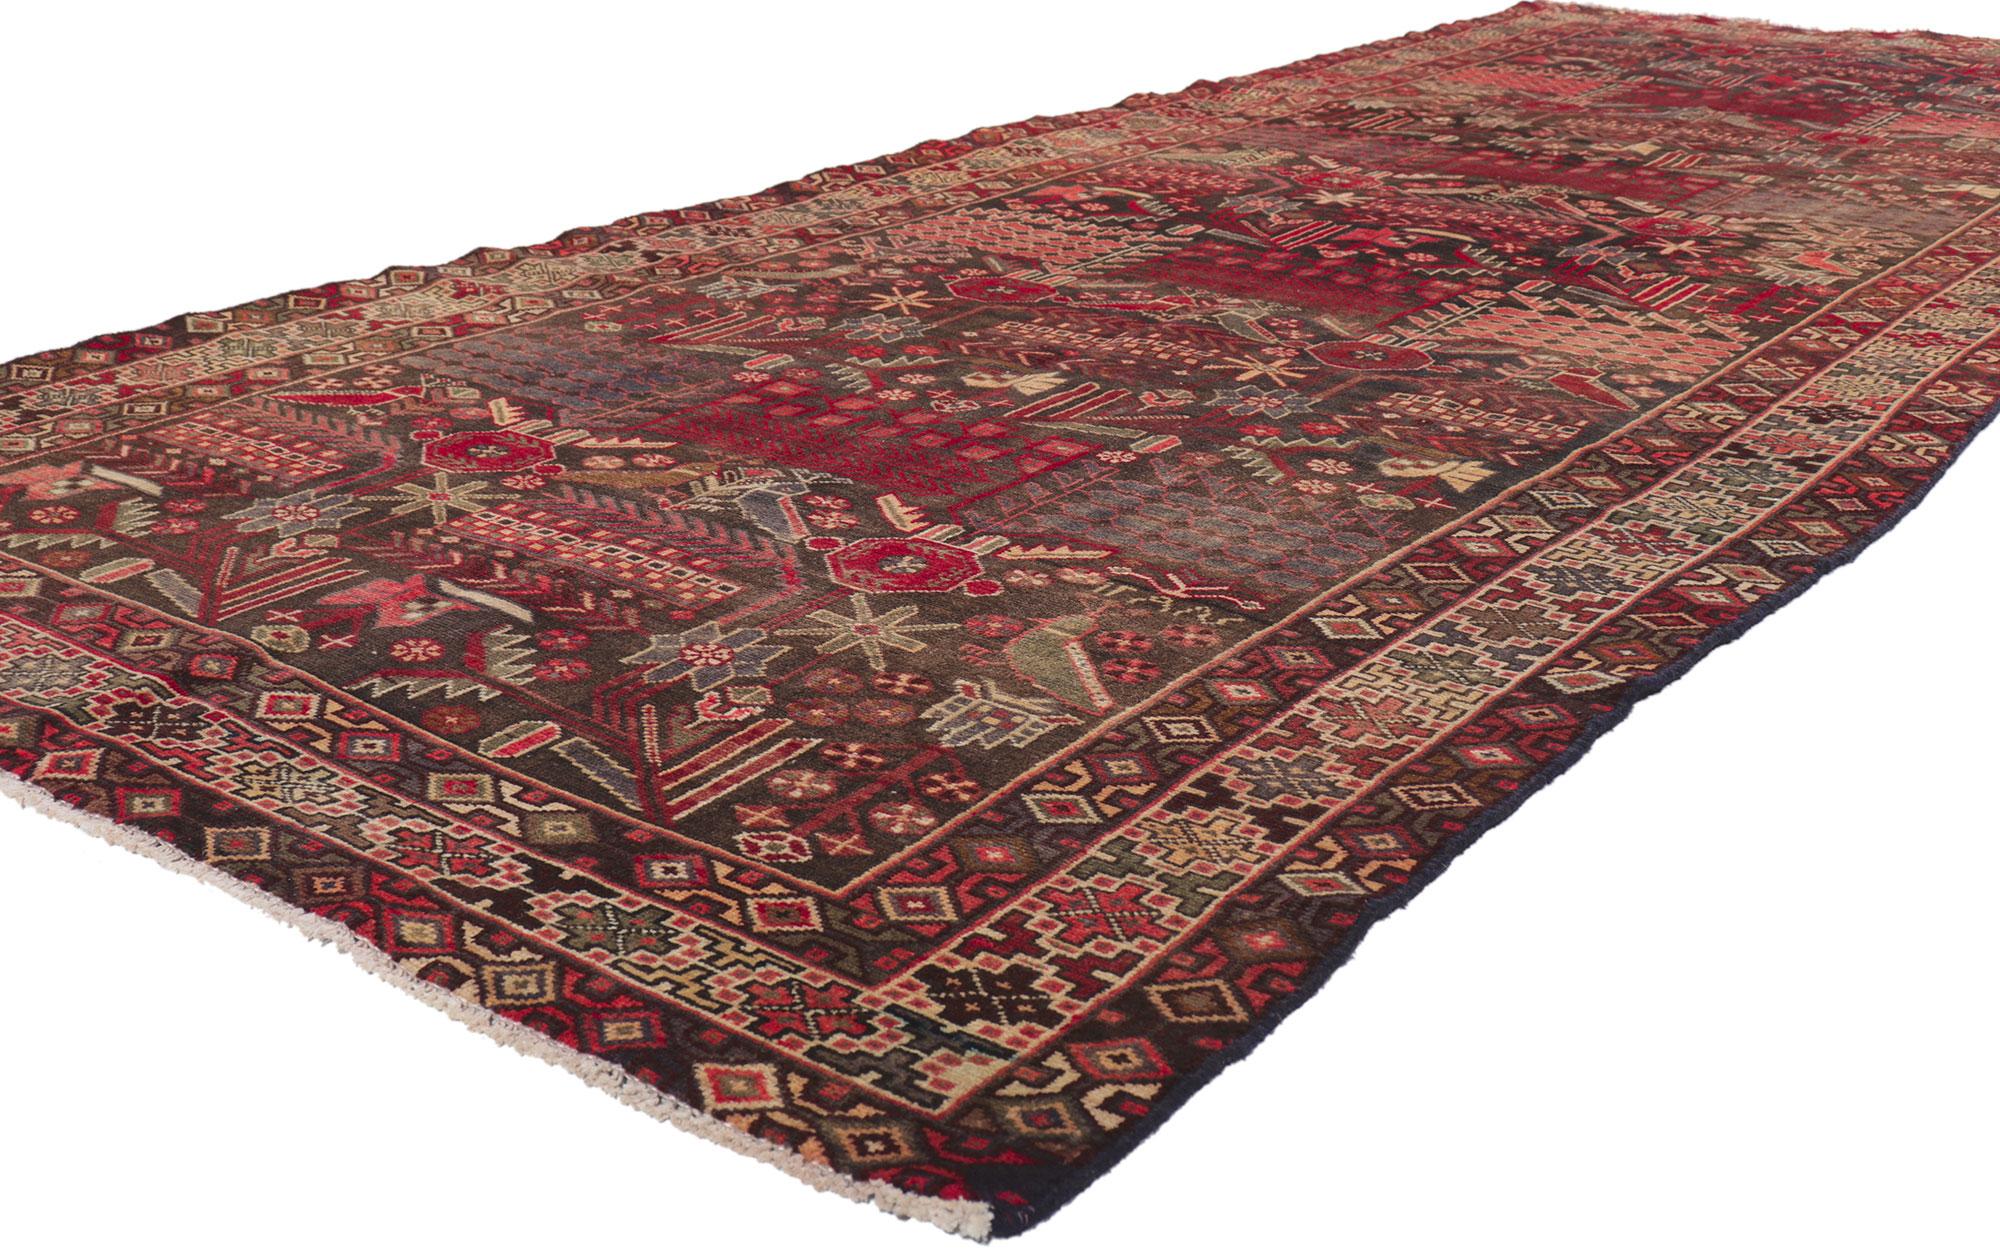 61224 Vintage Persian Bakhtiari rug, 04'11 x 12'07. With its rugged beauty, incredible detail and texture, this hand knotted wool vintage Persian Bakhtiari rug is a captivating vision of woven beauty. The geometric design and lively colorway woven